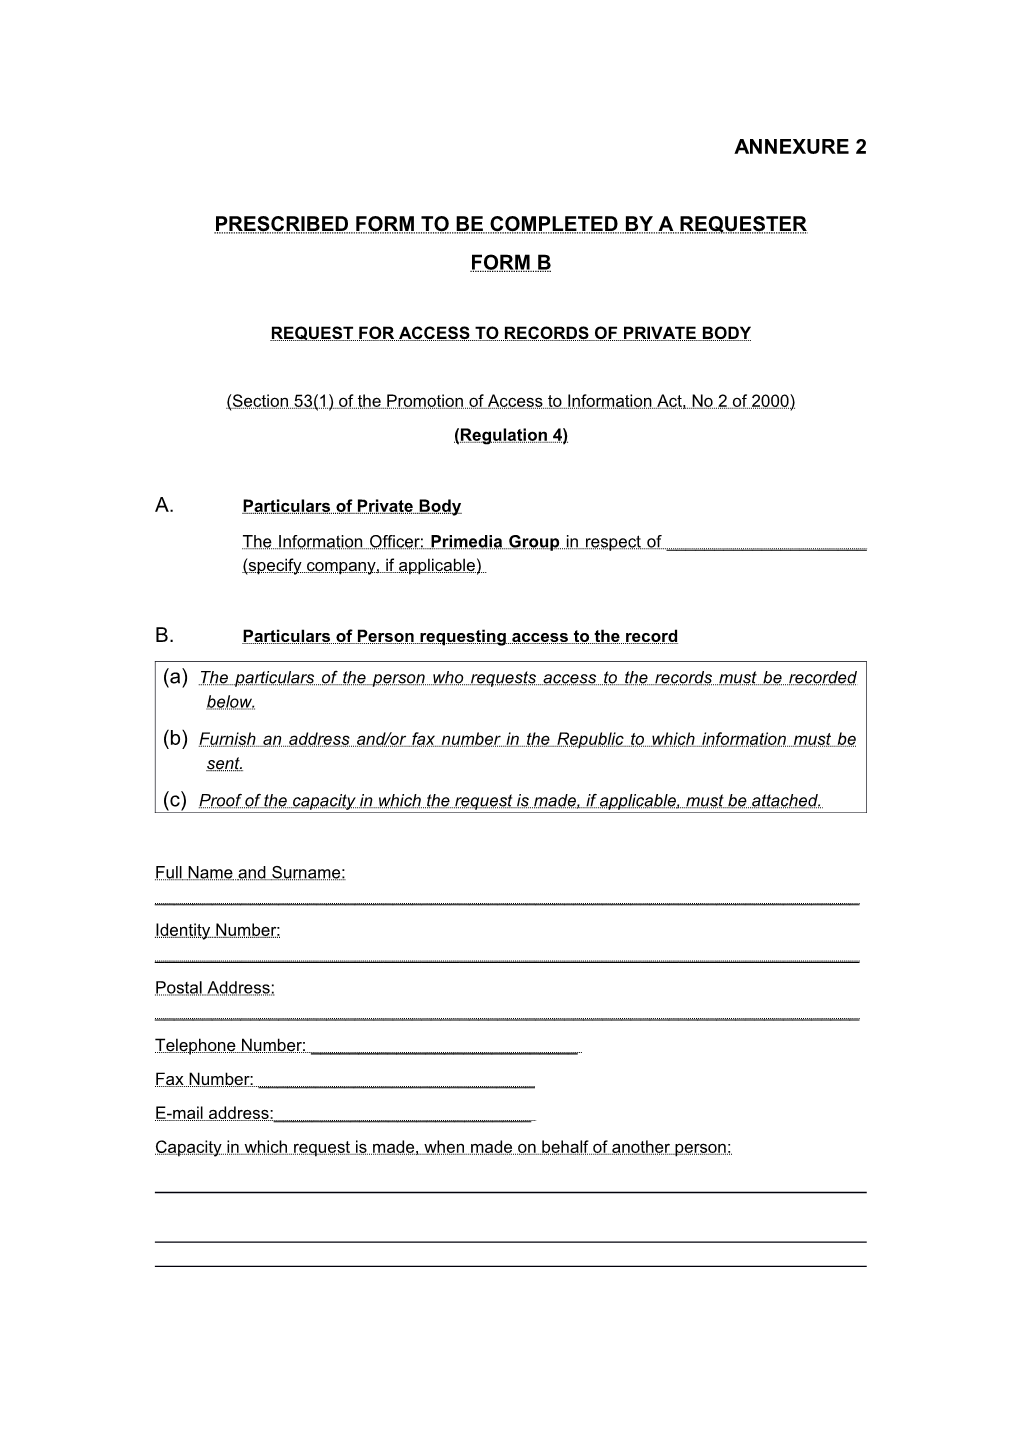 Prescribed Form to Be Completed by a Requester